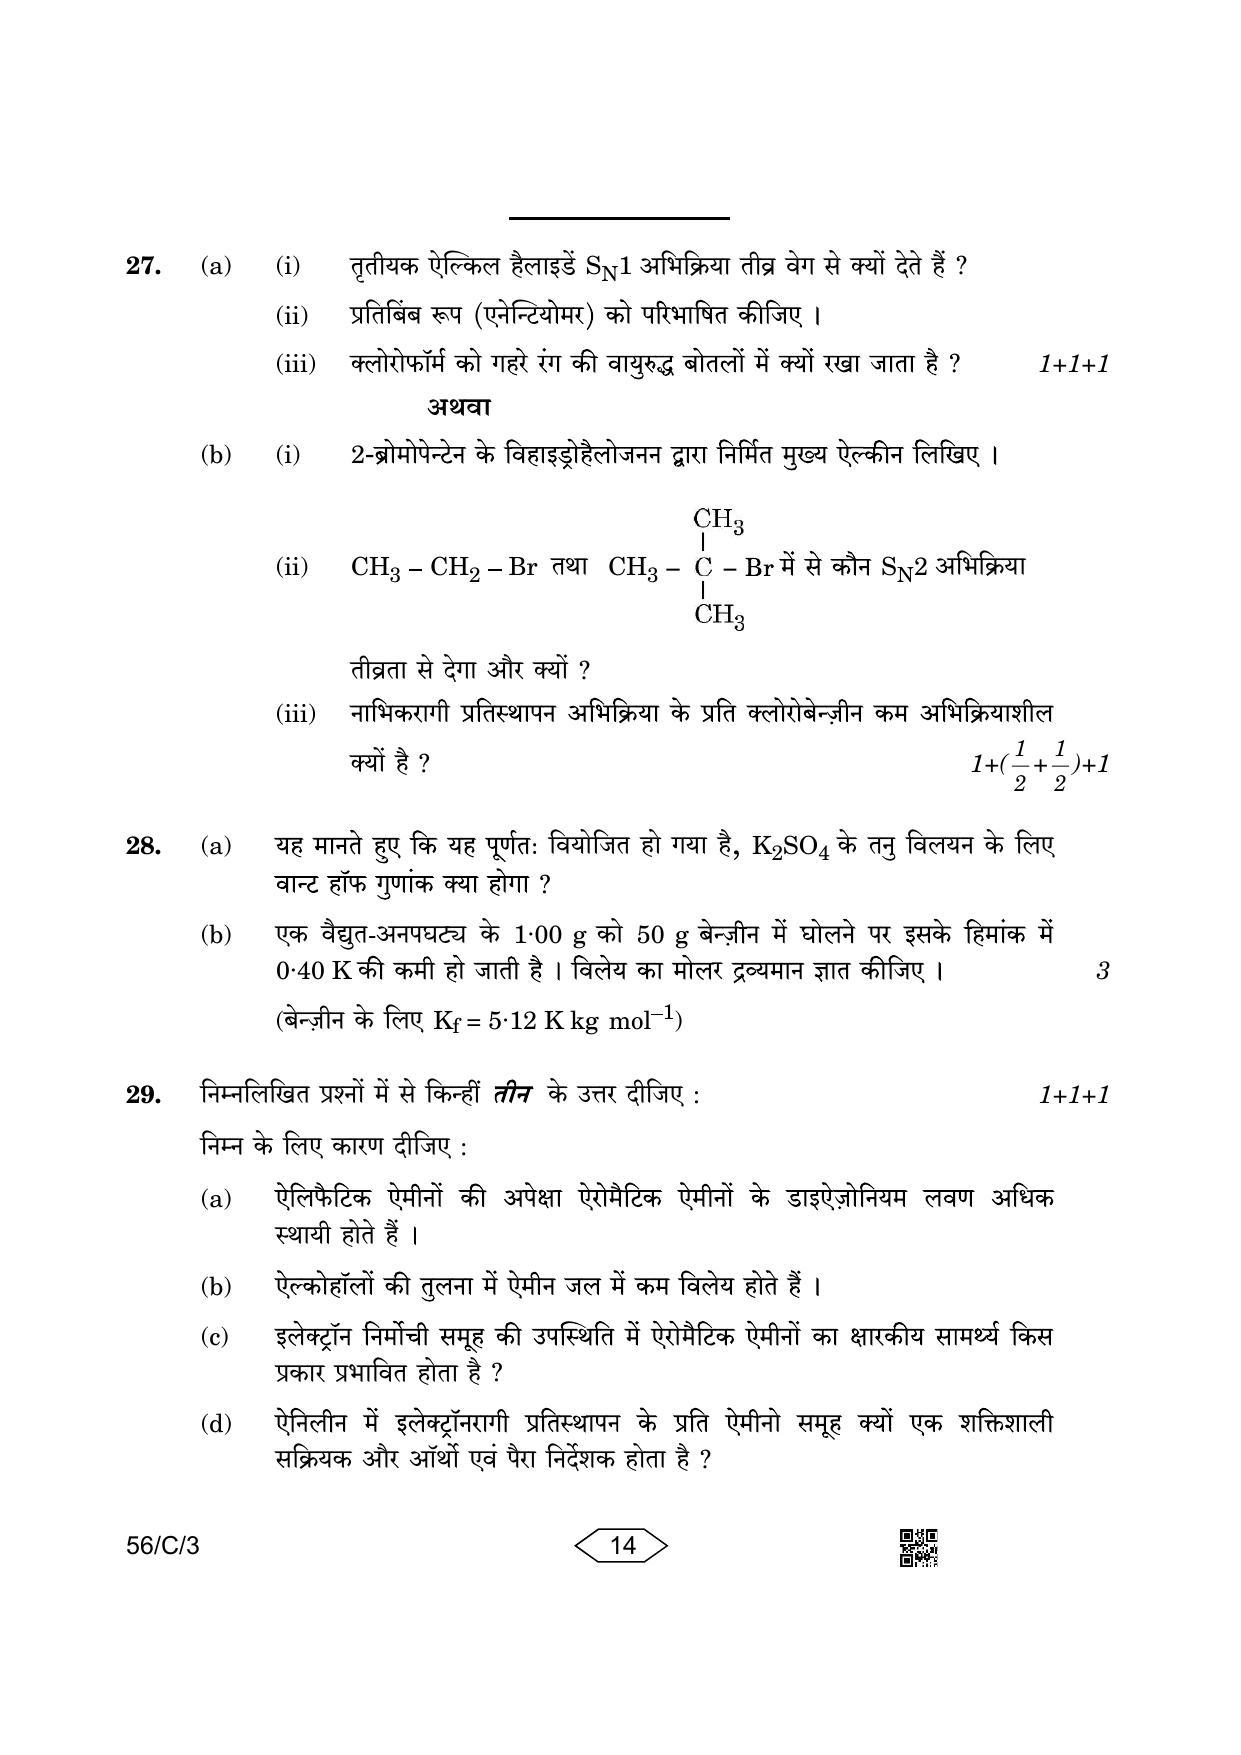 CBSE Class 12 56-3 Chemistry 2023 (Compartment) Question Paper - Page 14